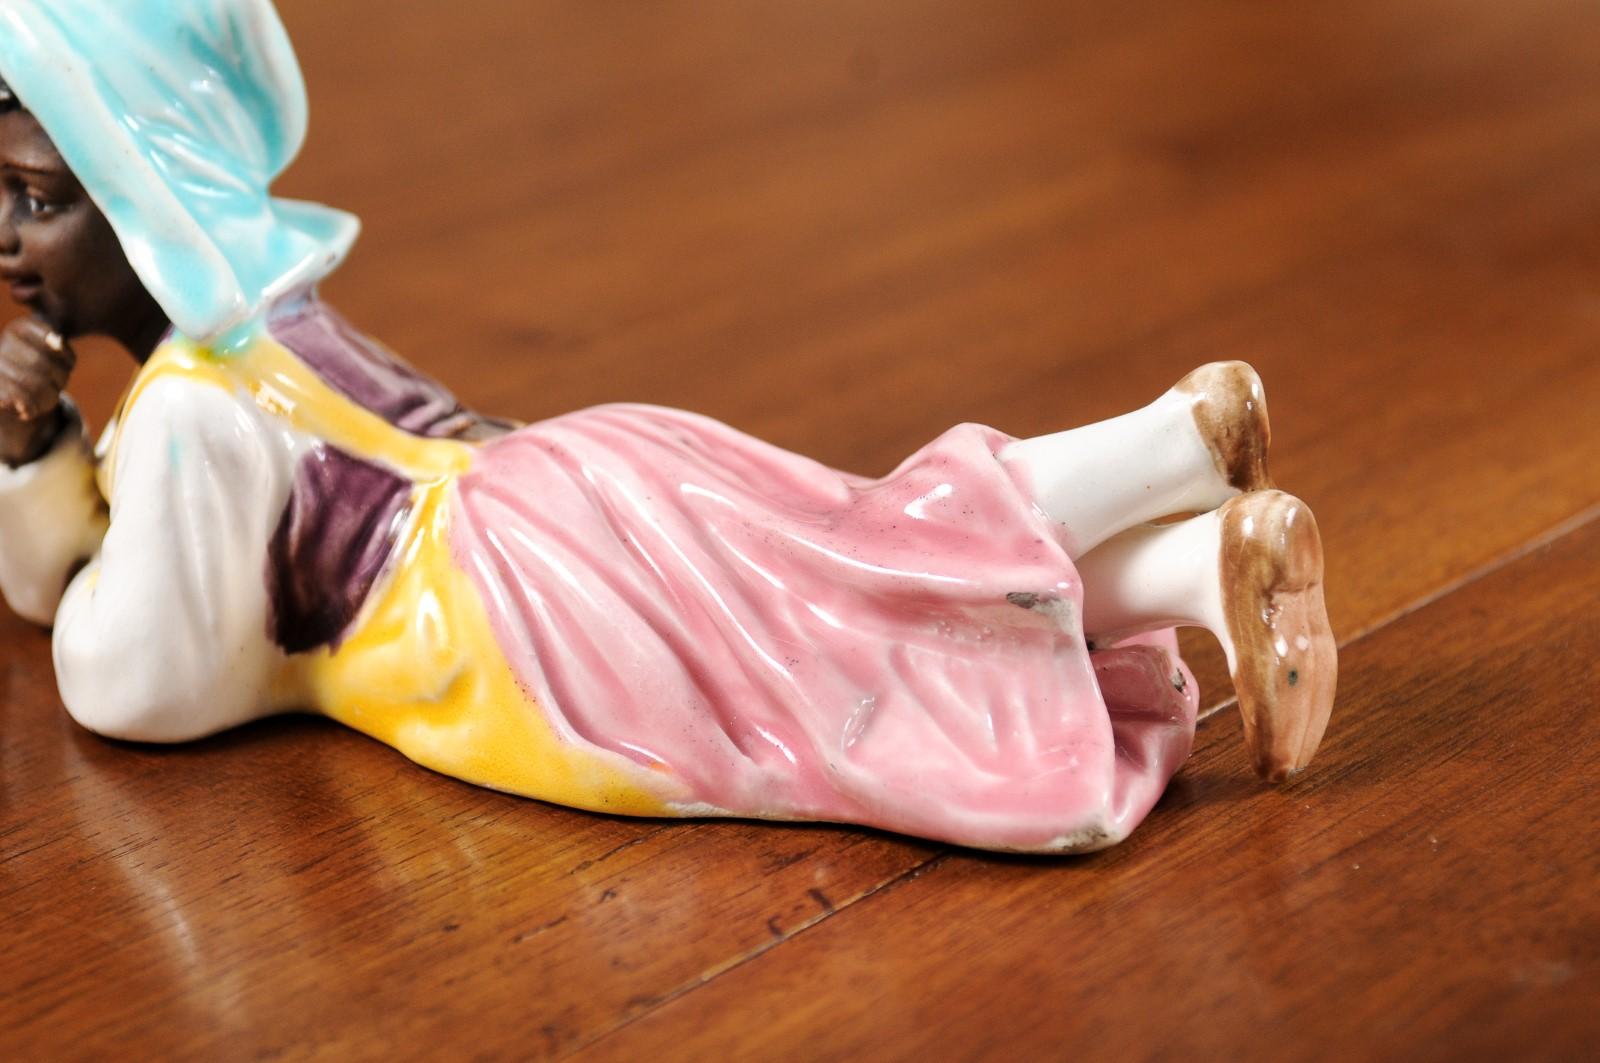 Petite English Porcelain Figurine Depicting a Young Girl Laying on the Ground For Sale 8